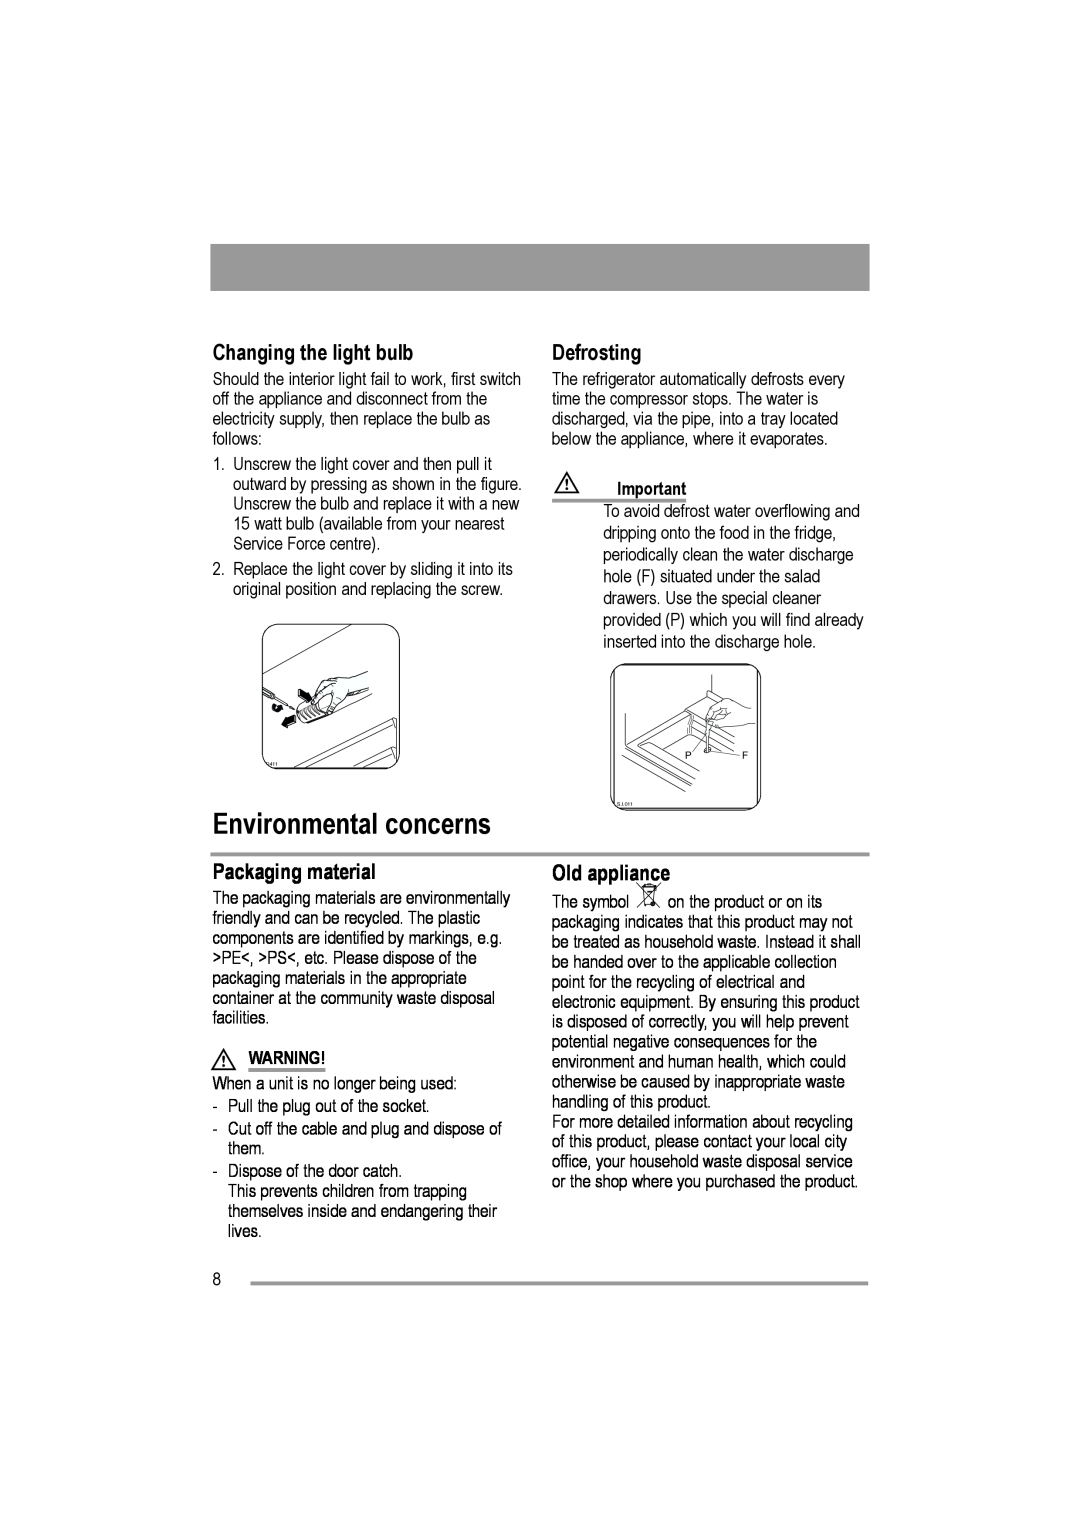 Moffat MUL 514 user manual Environmental concerns, Changing the light bulb, Defrosting, Packaging material, Old appliance 